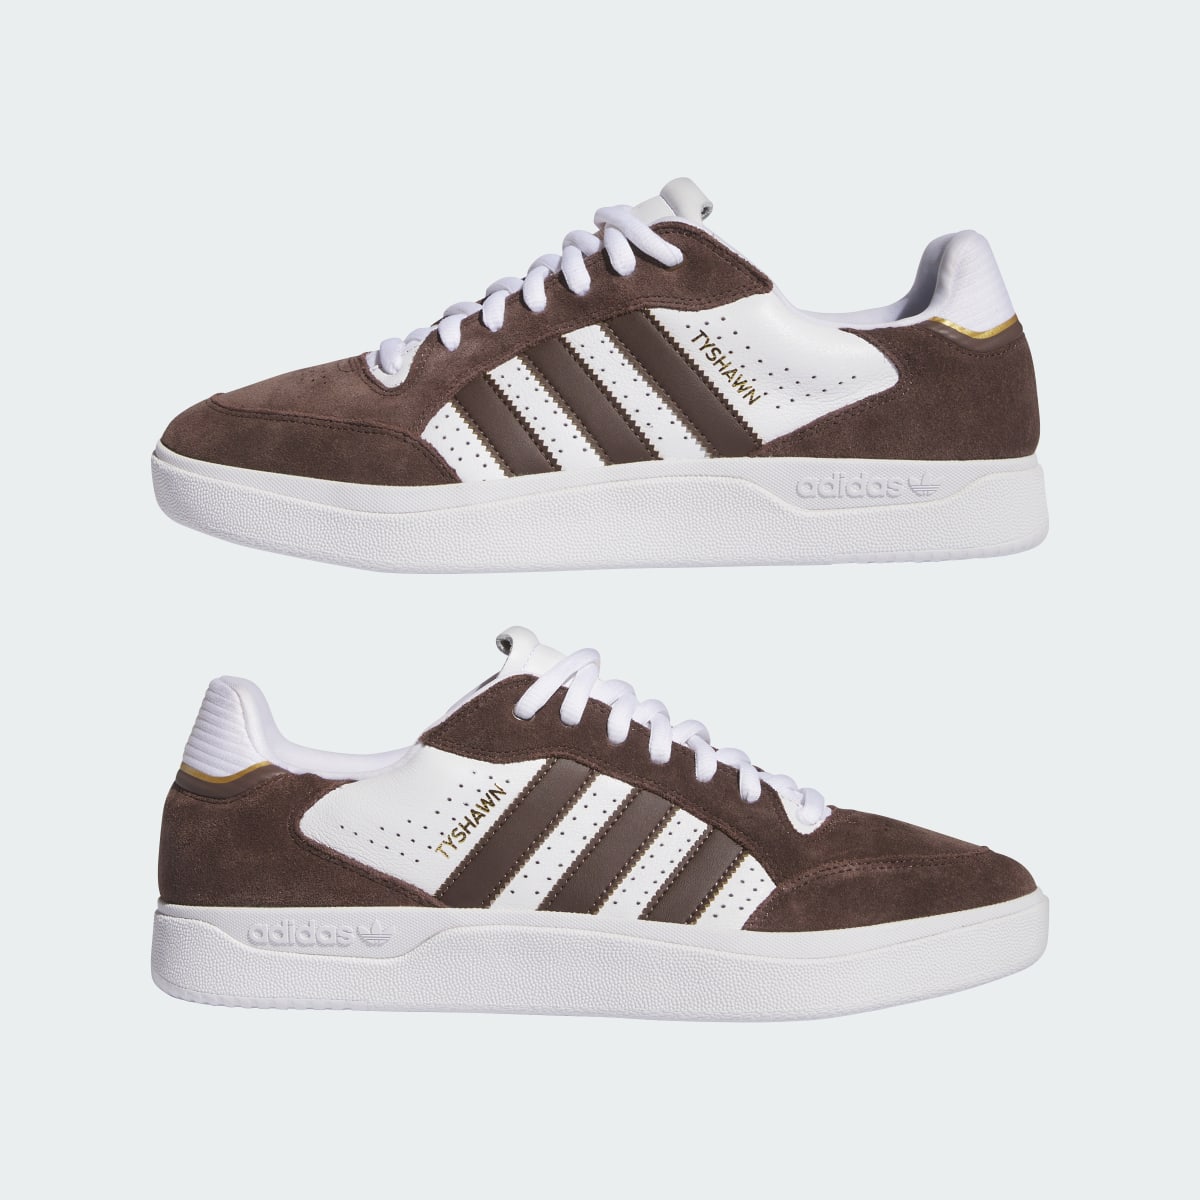 Adidas Tyshawn Low Shoes. 8